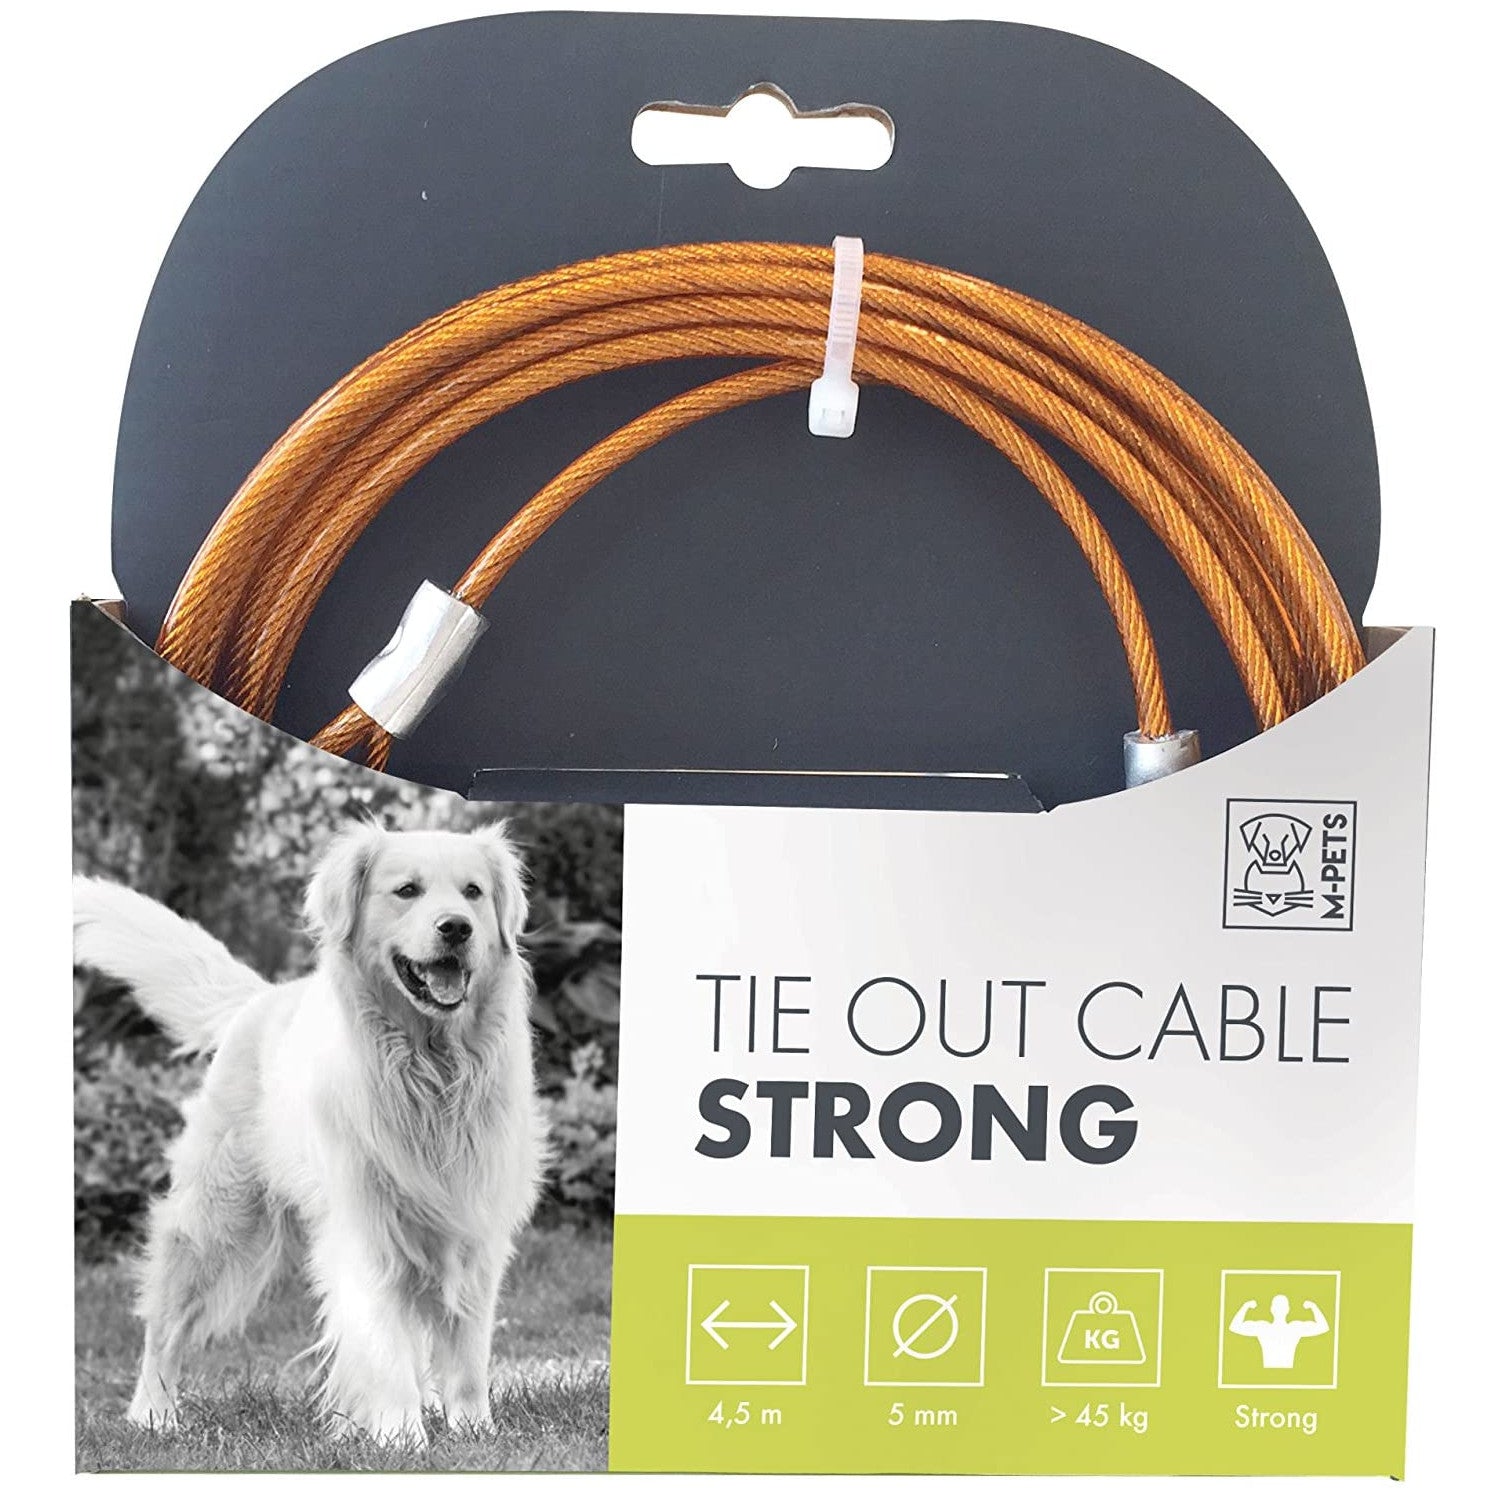 M-PETS Tie Out Cable, for Dogs up to 45kg  - 4.5m